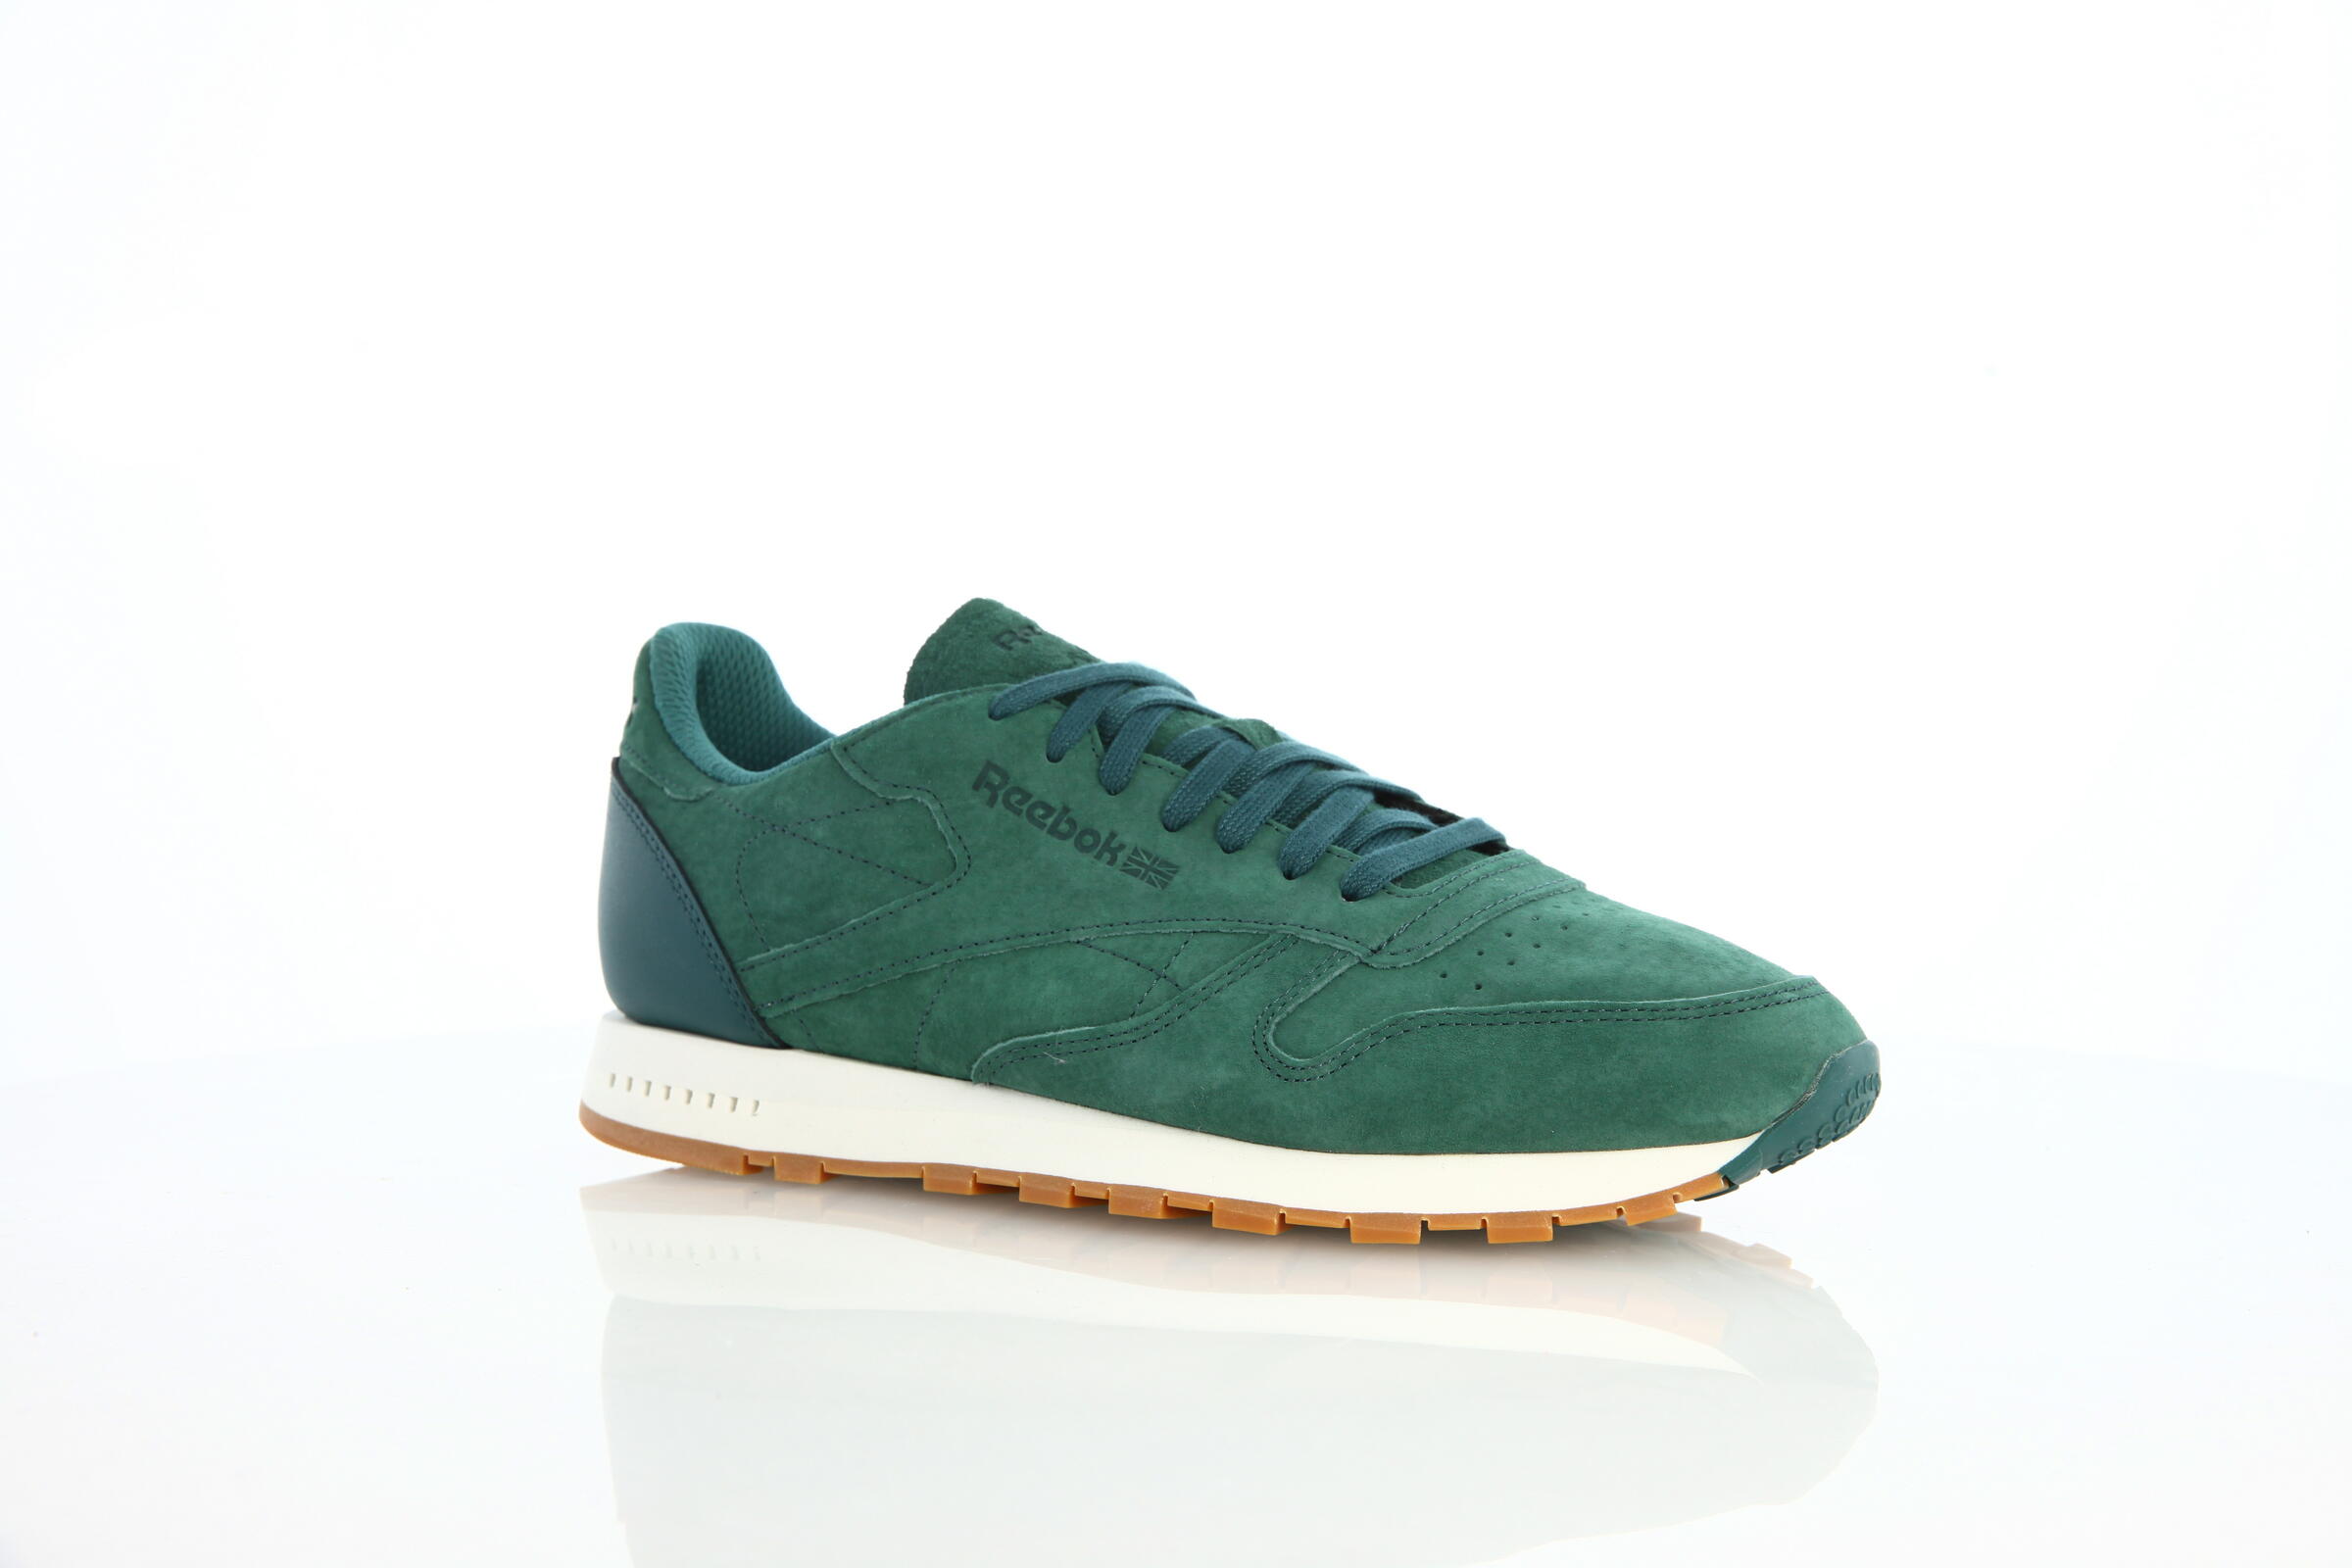 Reebok Classic Leather Sg "Washed Jade"